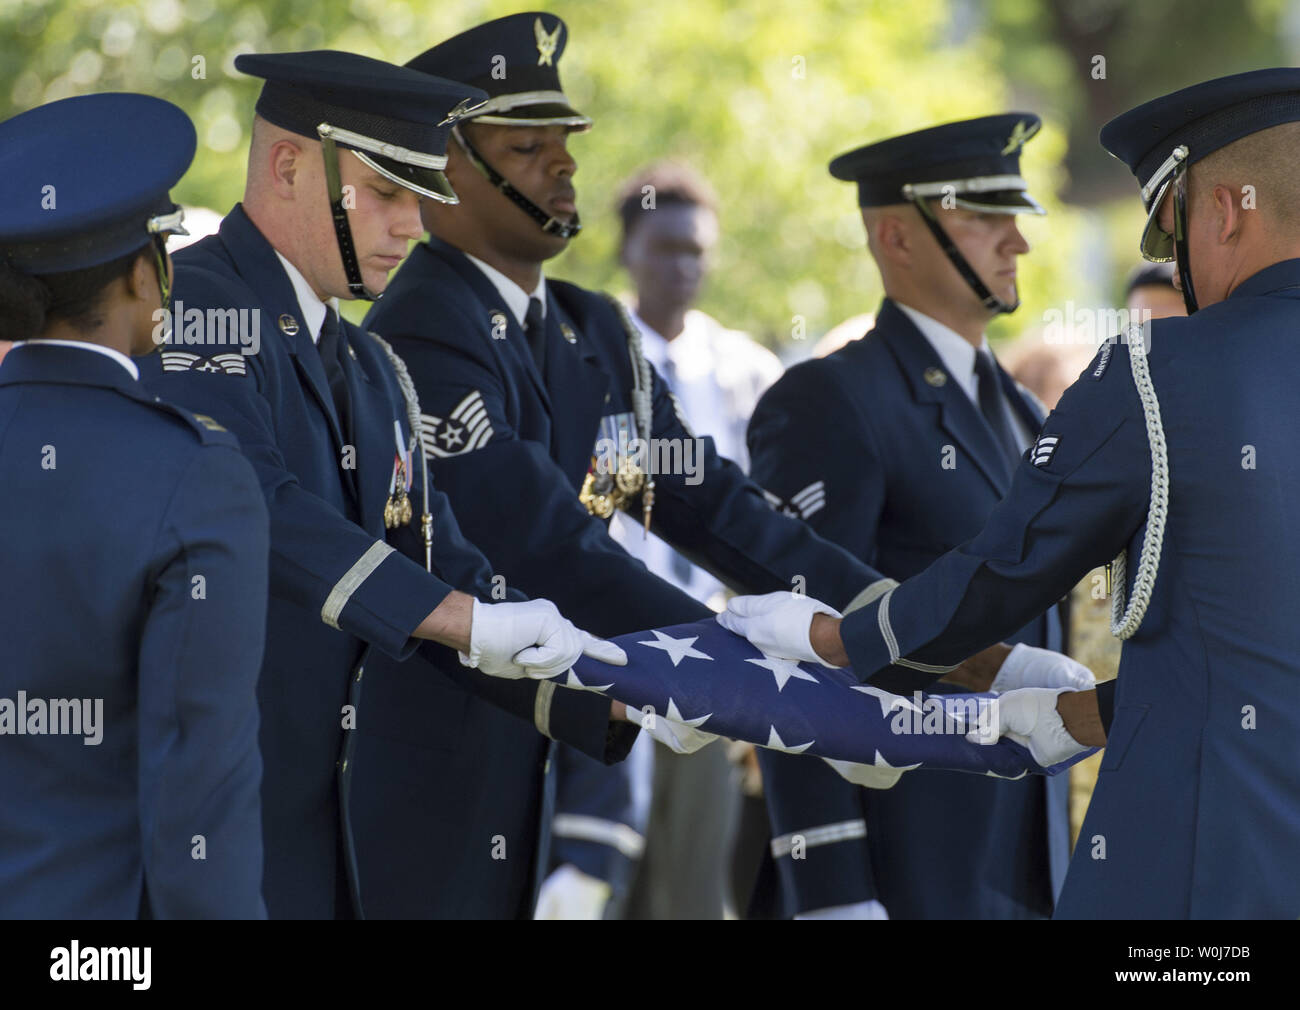 An Air Force Honor Guard folds an American flag during the funeral service for U.S. Air Force 2nd Lt., Malvin Greston 'Mal' Whitfield, at Arlington National Cemetery in Arlington, Virginia on June 8, 2016. Whitfield served in the U.S. Army Air Forces in 1943 as a member of the Tuskegee Airmen and was also a five-time Olympic medalist, including three gold. Photo by Kevin Dietsch/UPI Stock Photo